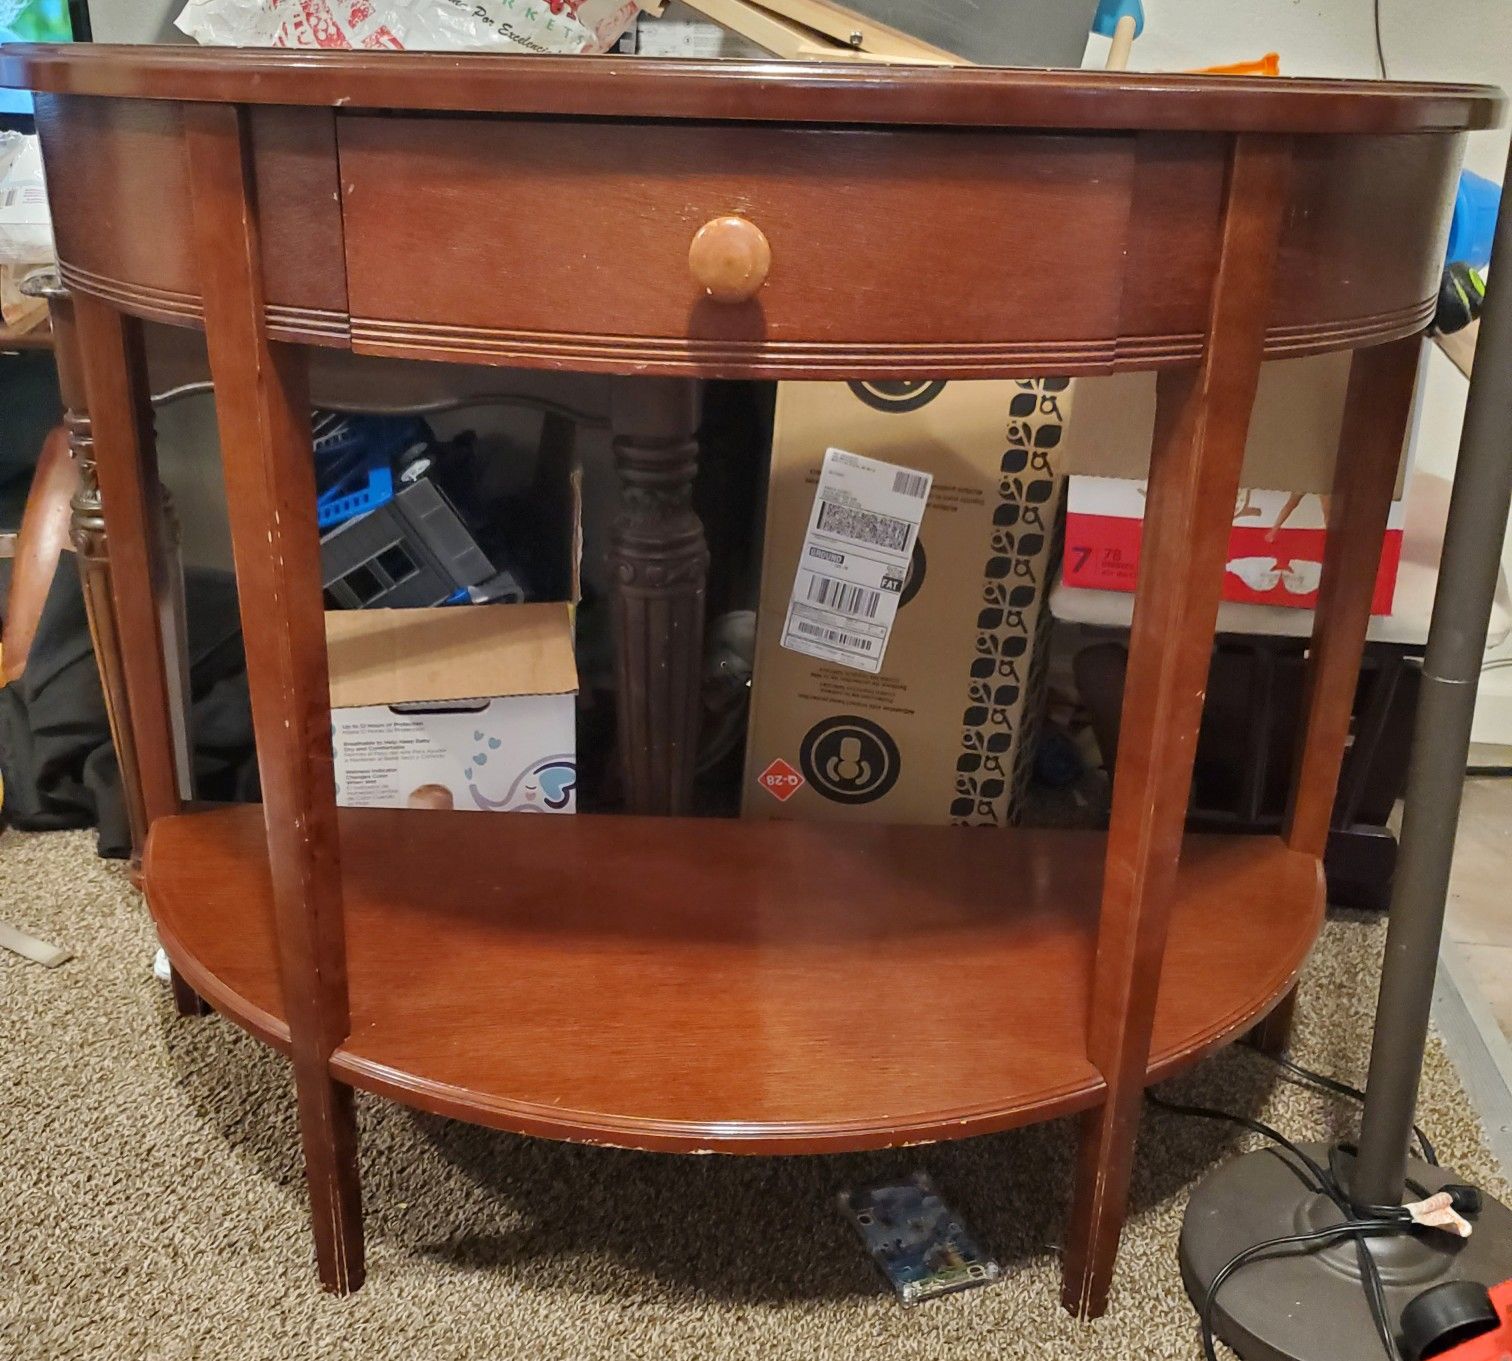 Console table for sale